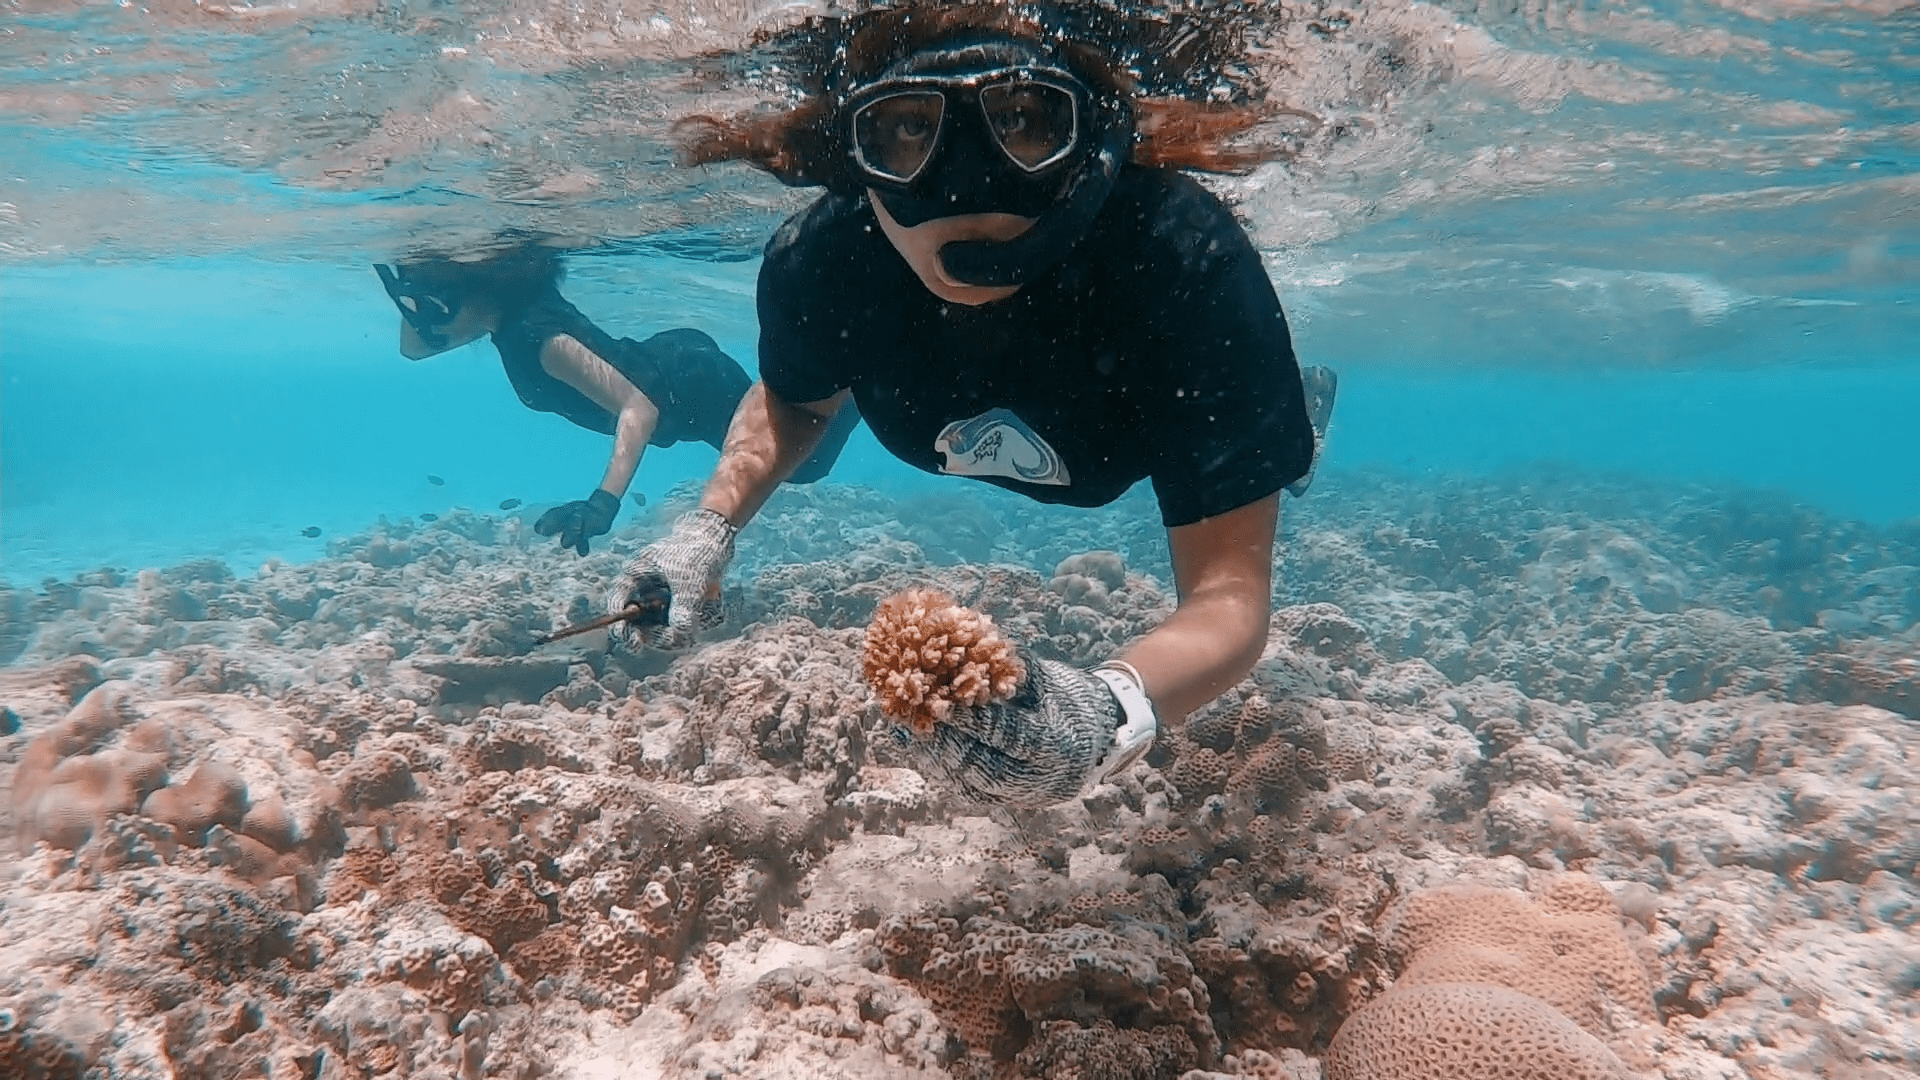 How to nab a once-in-a-lifetime gig saving coral reefs in the Maldives